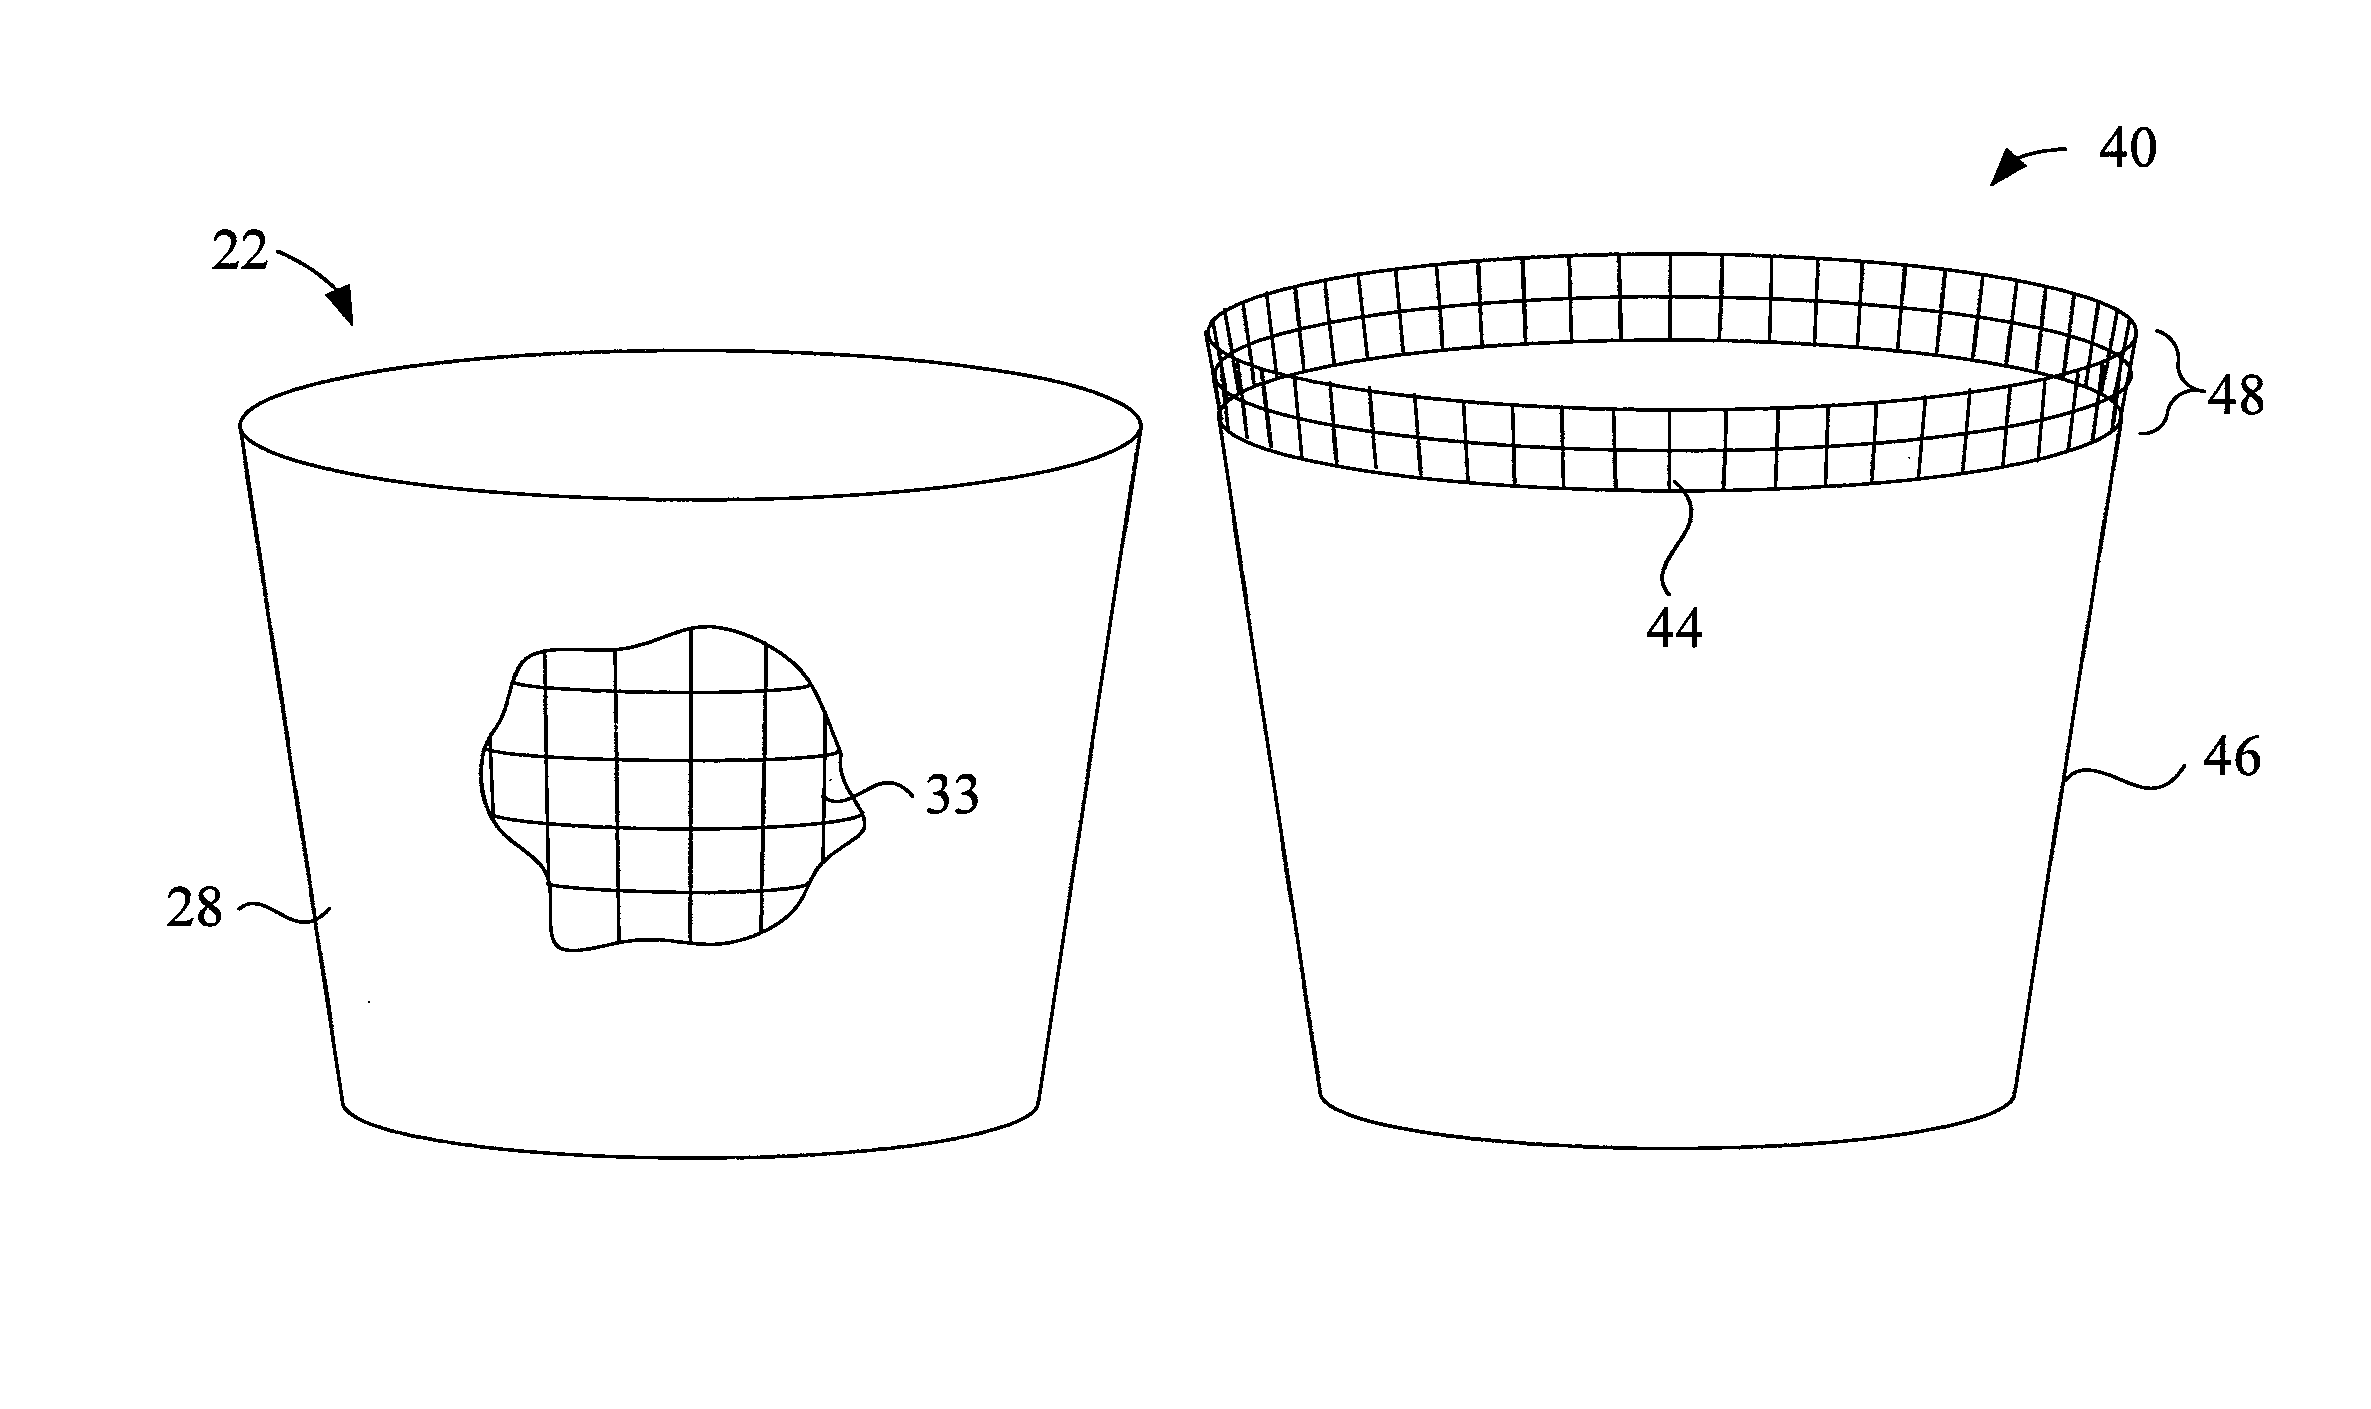 Planting pots with wire mesh and biodegradable material